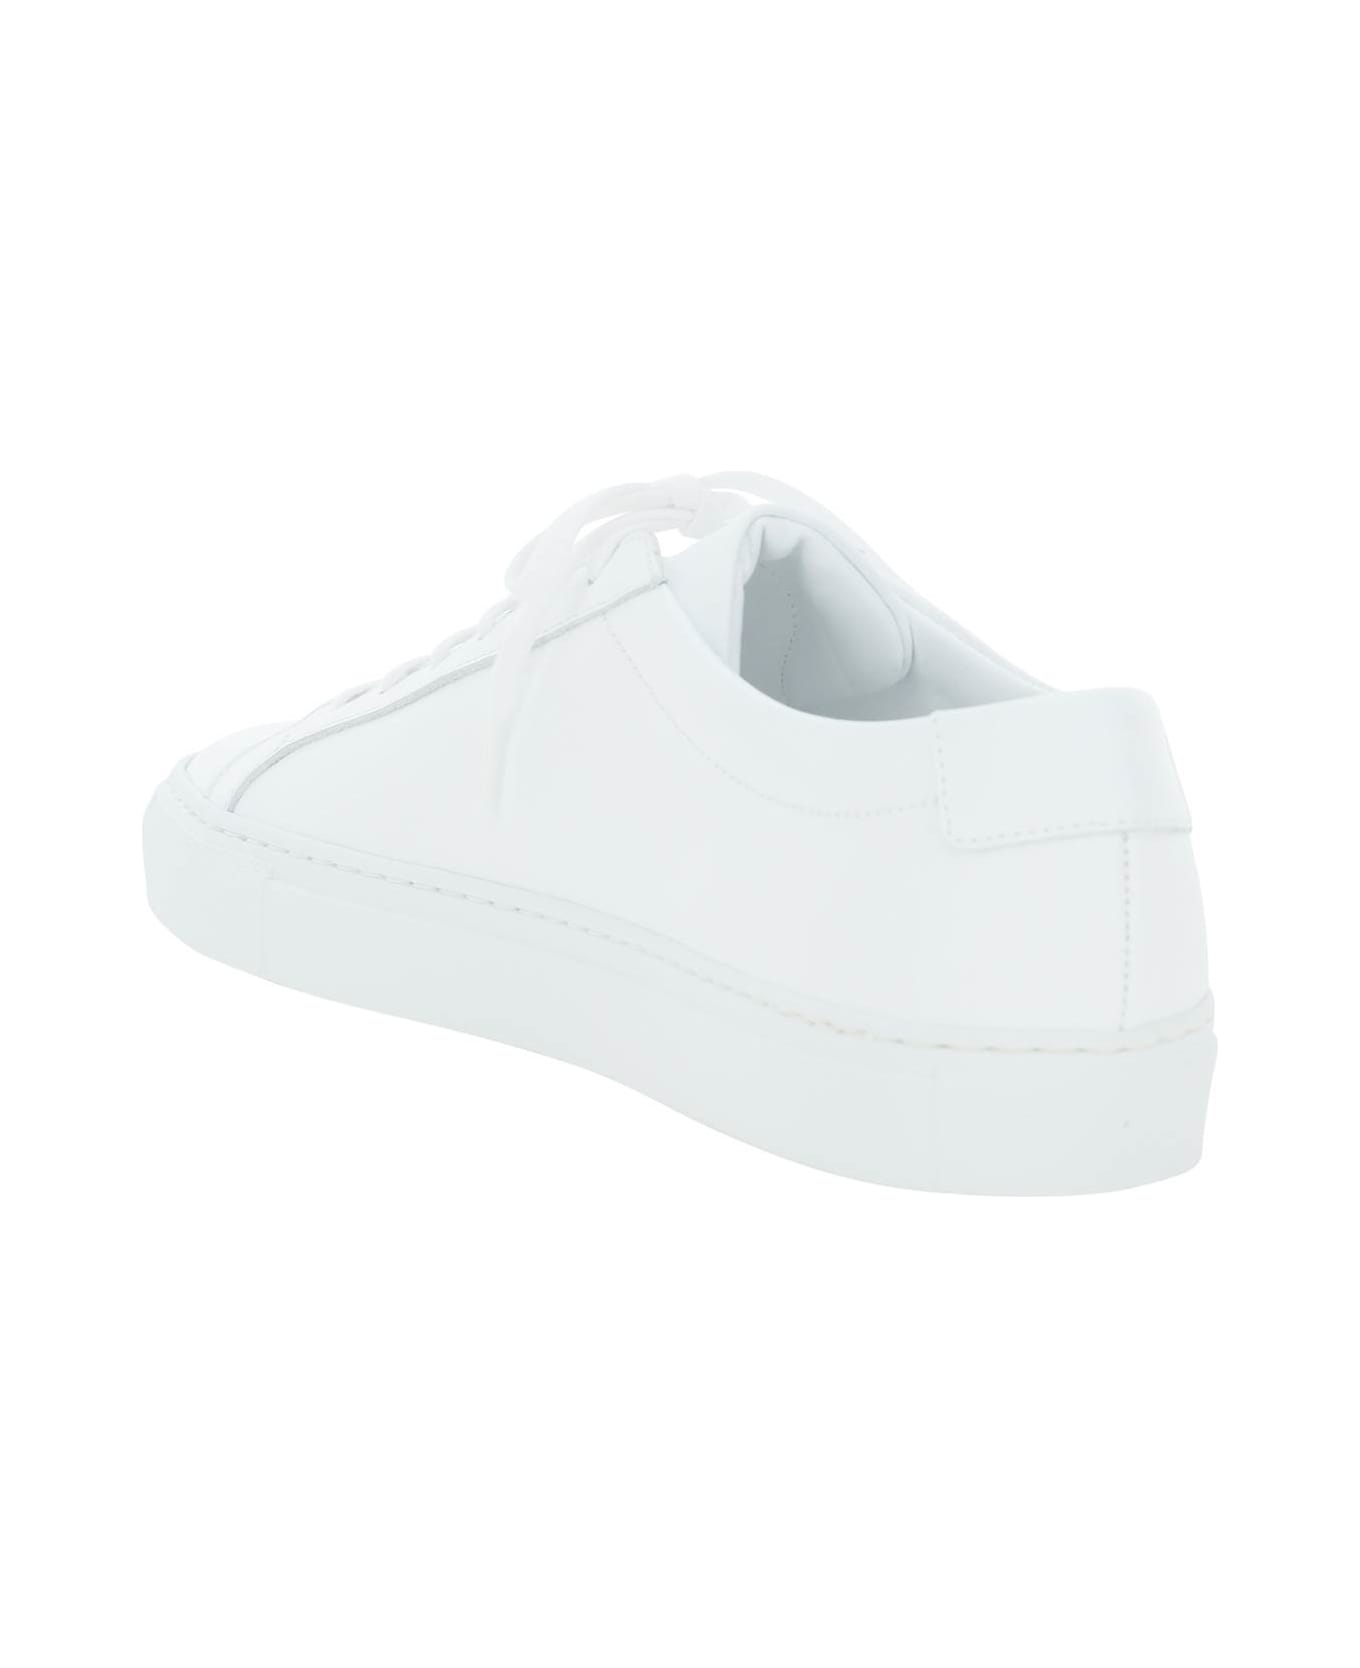 Common Projects Total White 'achilles' Sustent - White